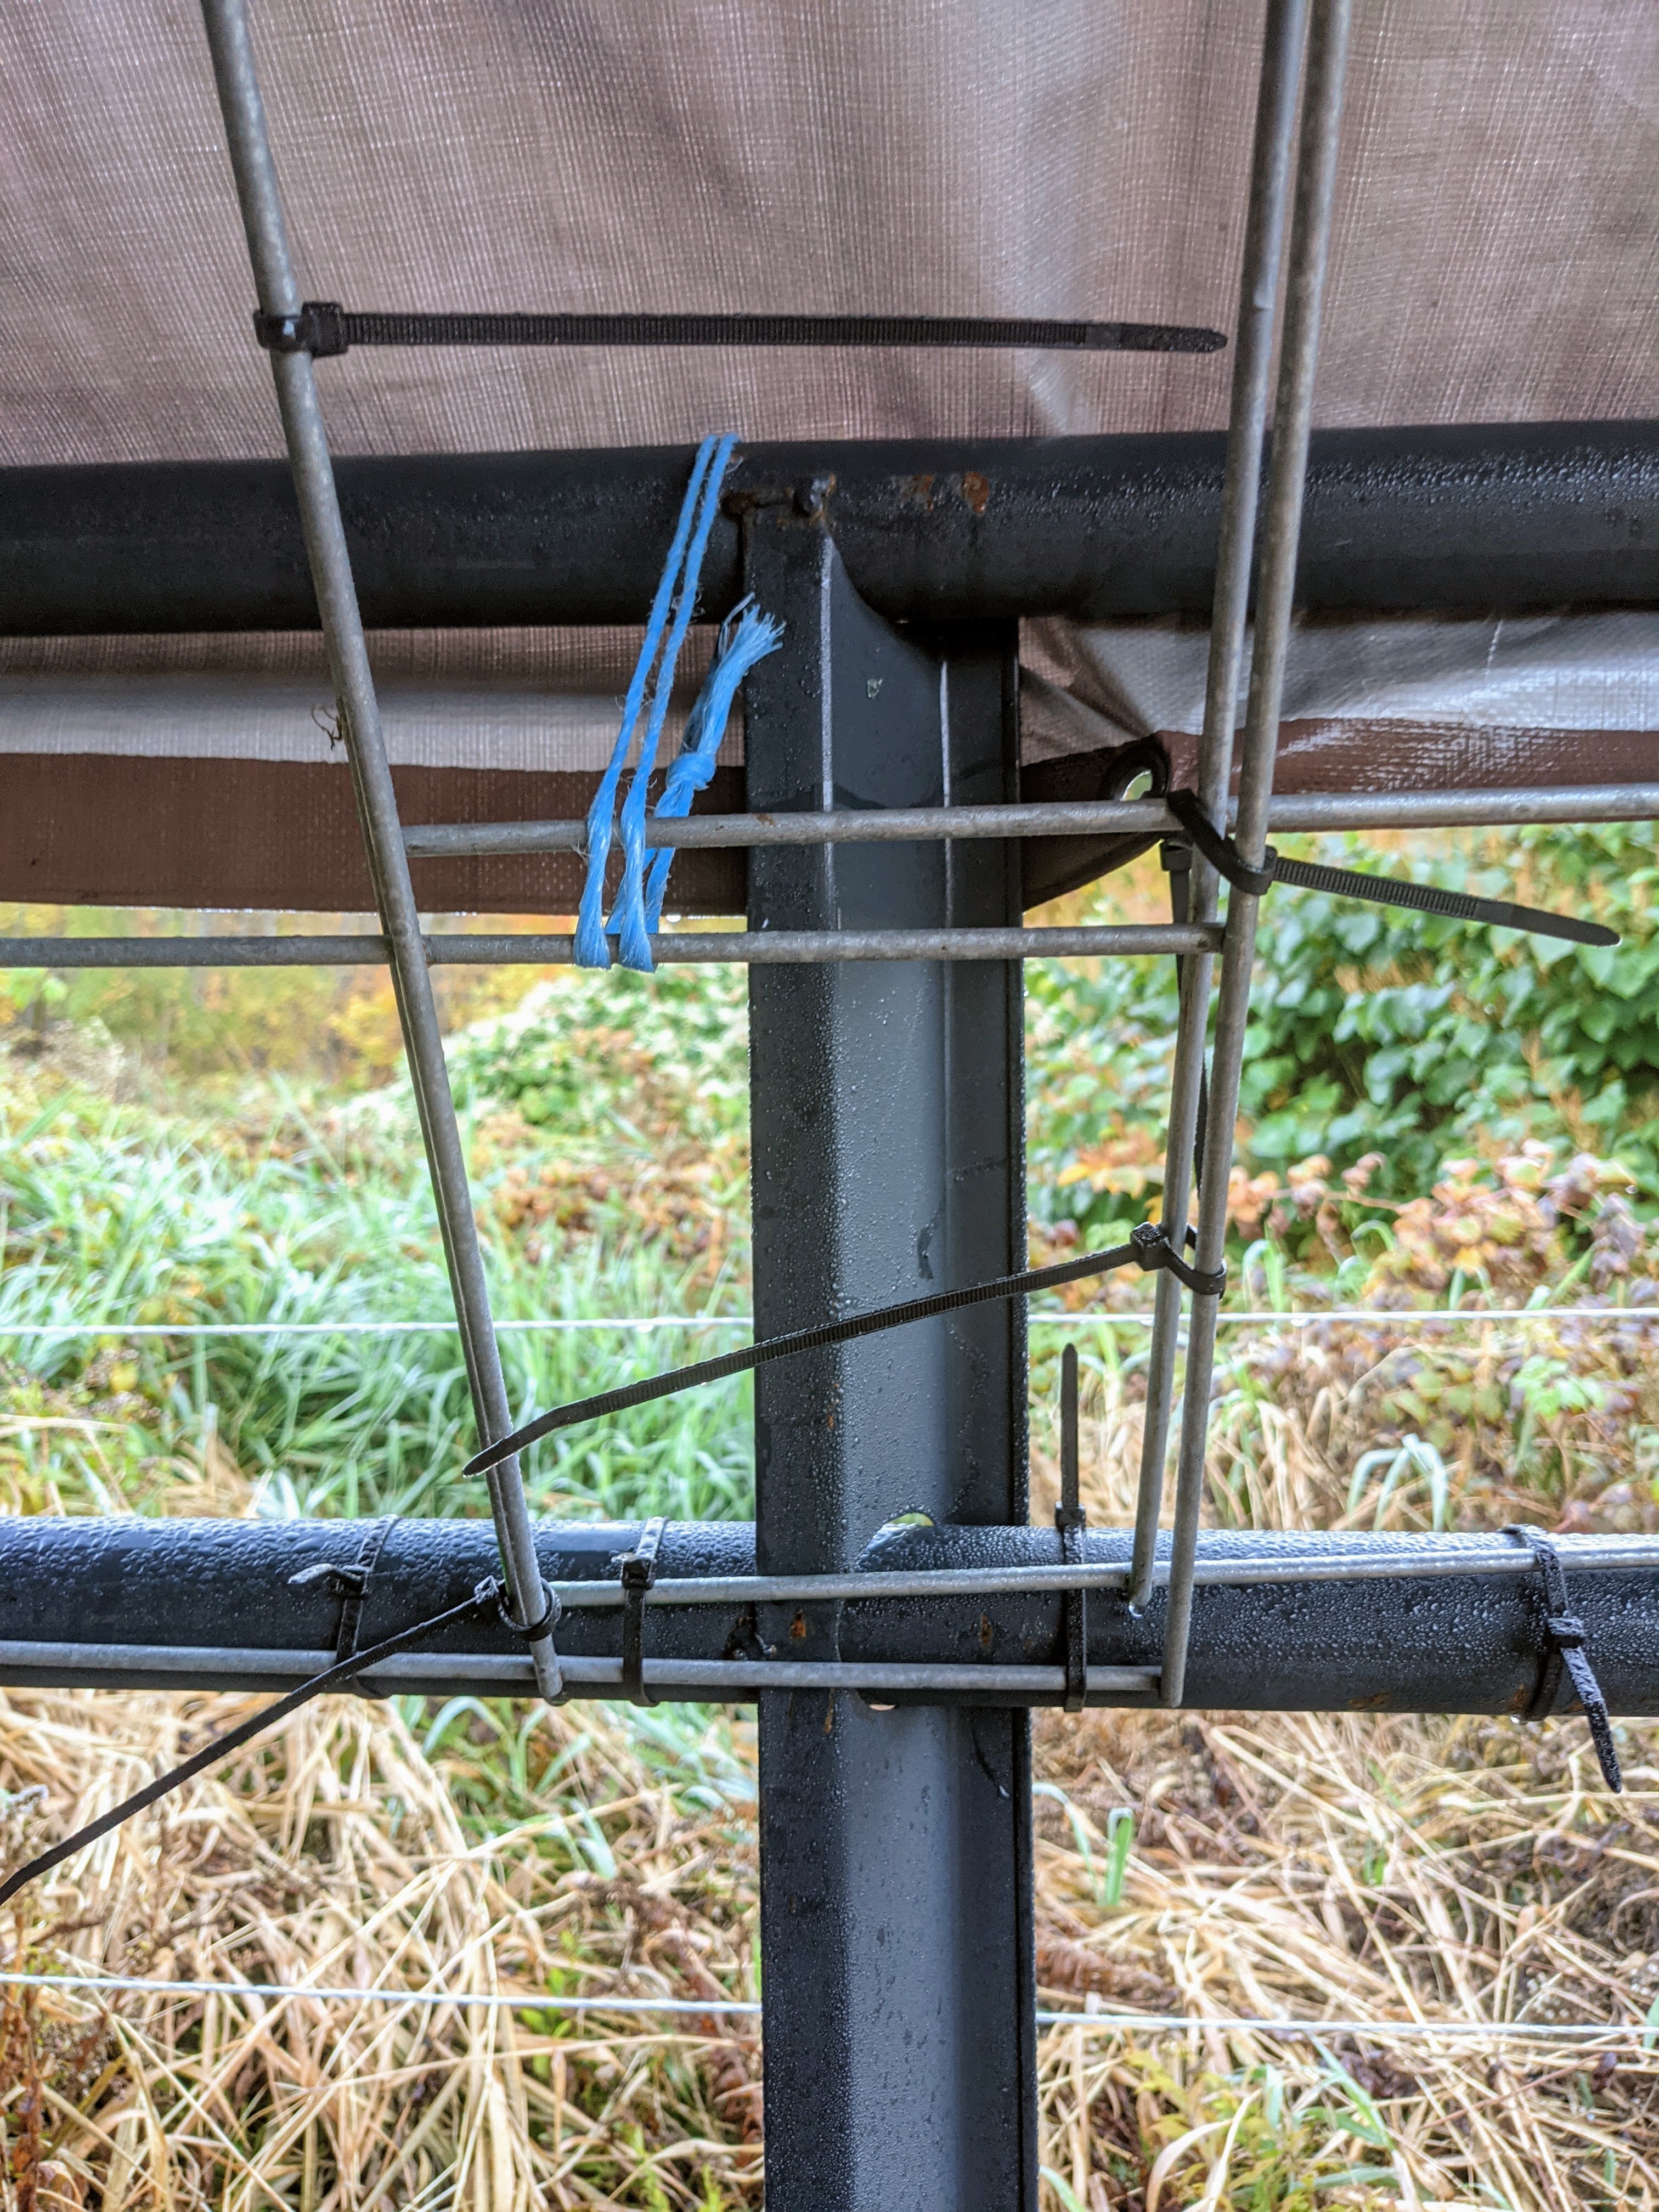 Overlap cattle panels for the roof and secure with zip ties.